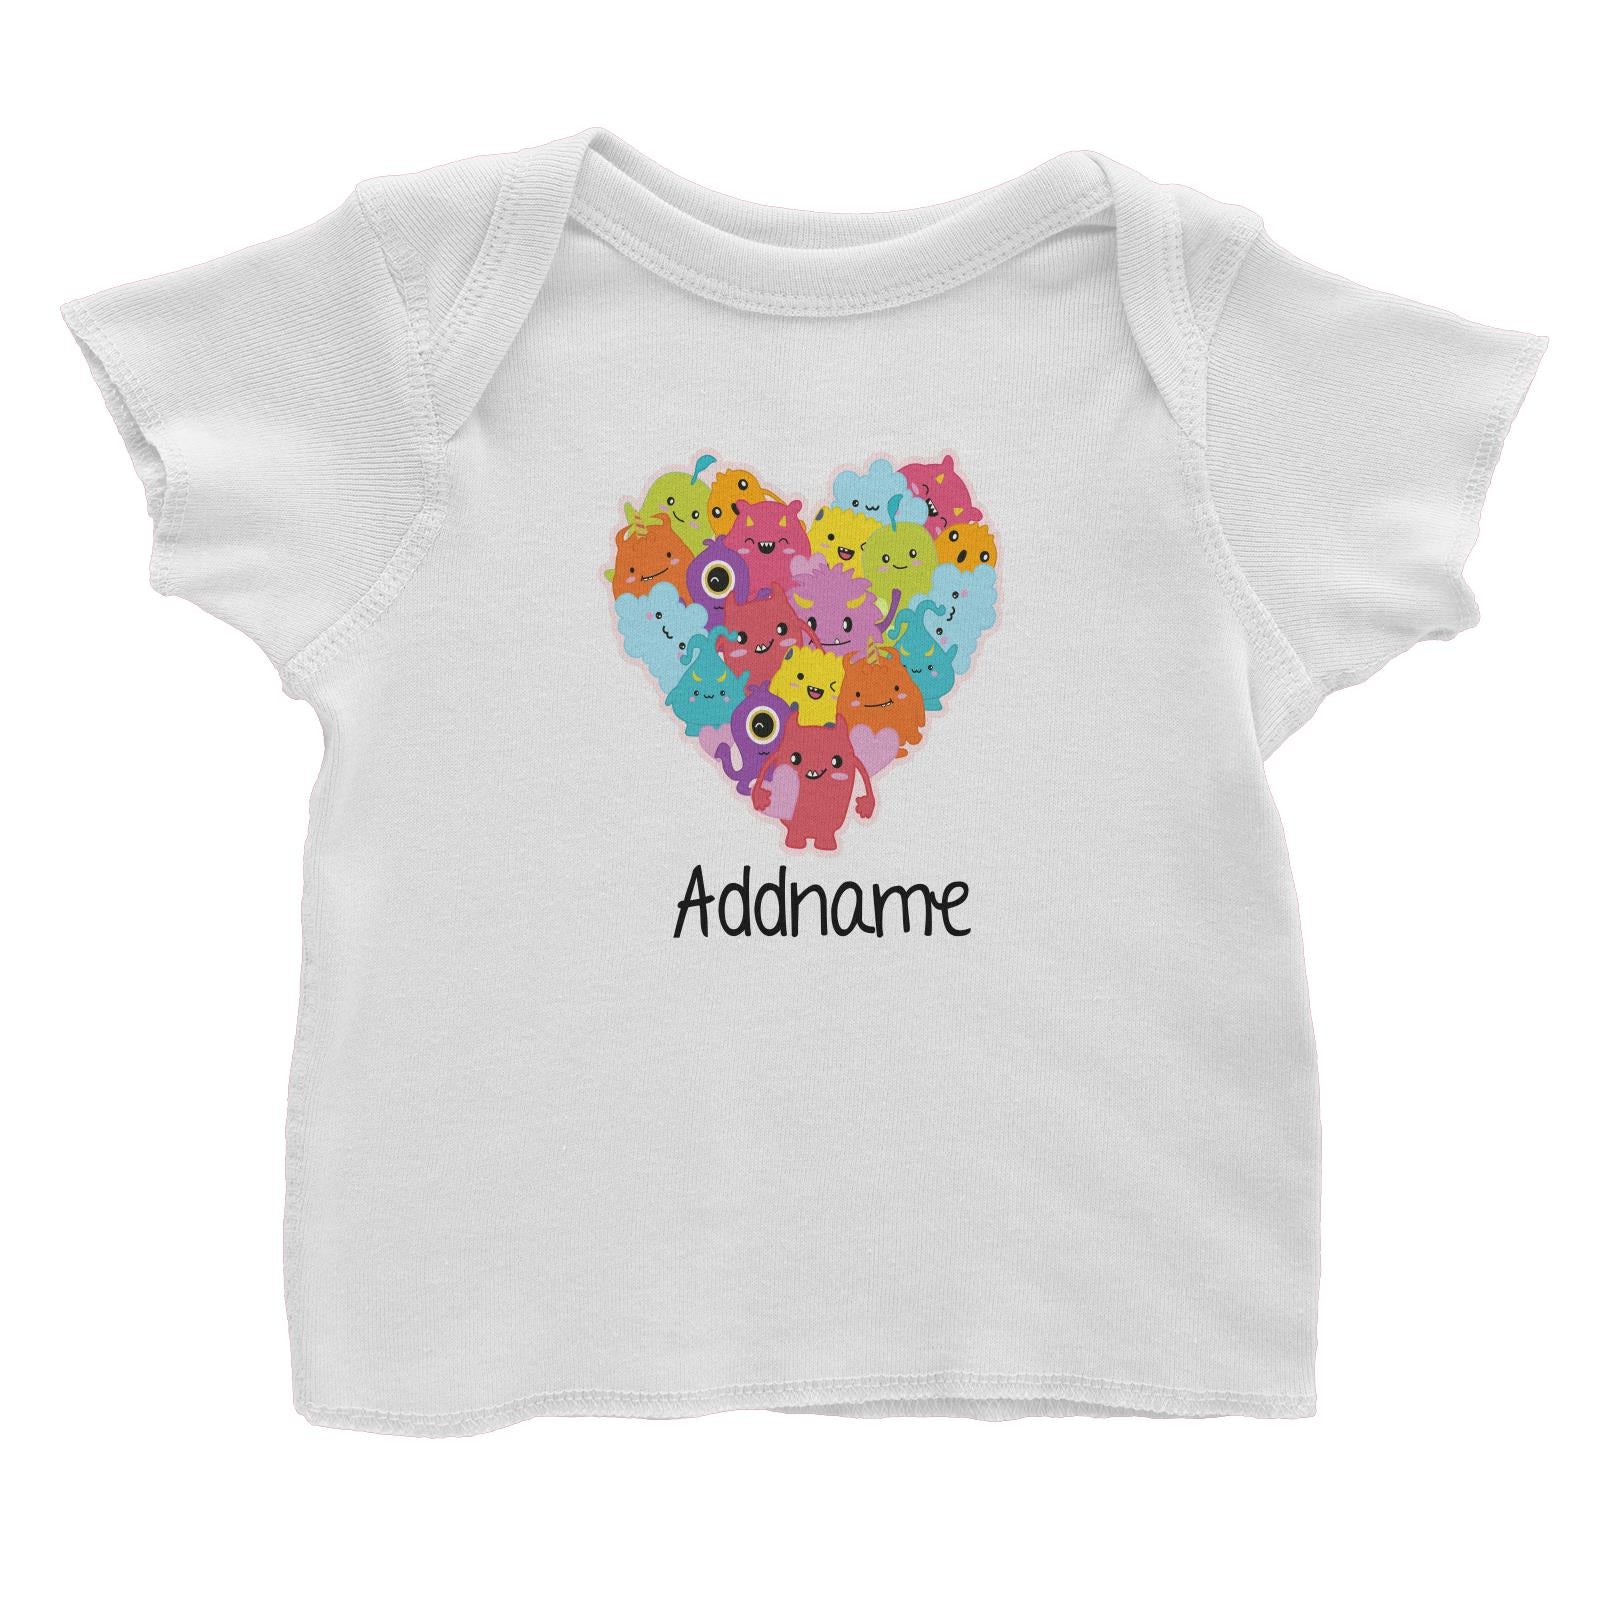 Cute Animals And Friends Series Cute Little Monster Group Heart Addname Baby T-Shirt